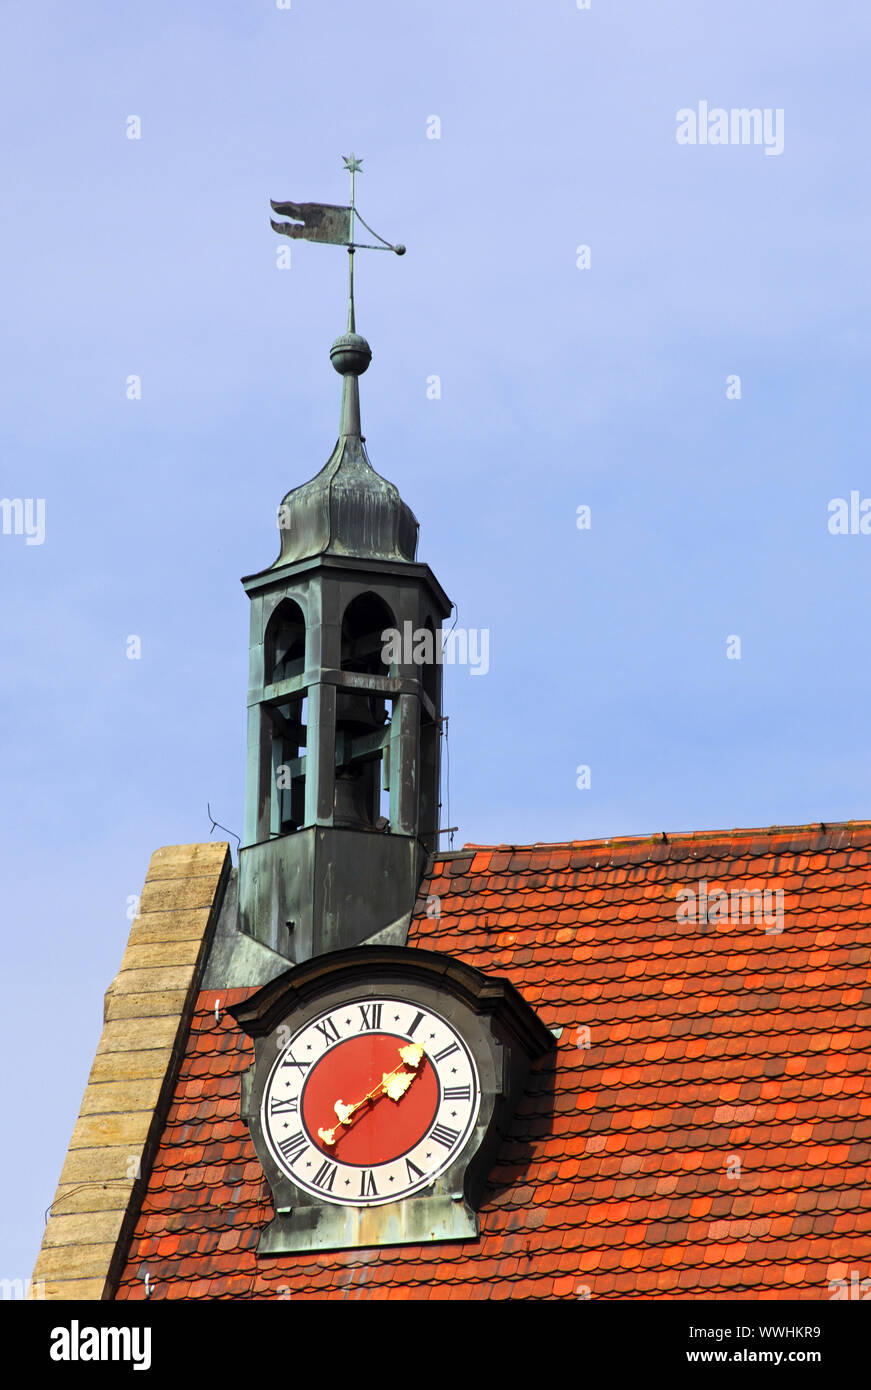 Tiled roof with clock tower and weather vane, Ansbach Stock Photo